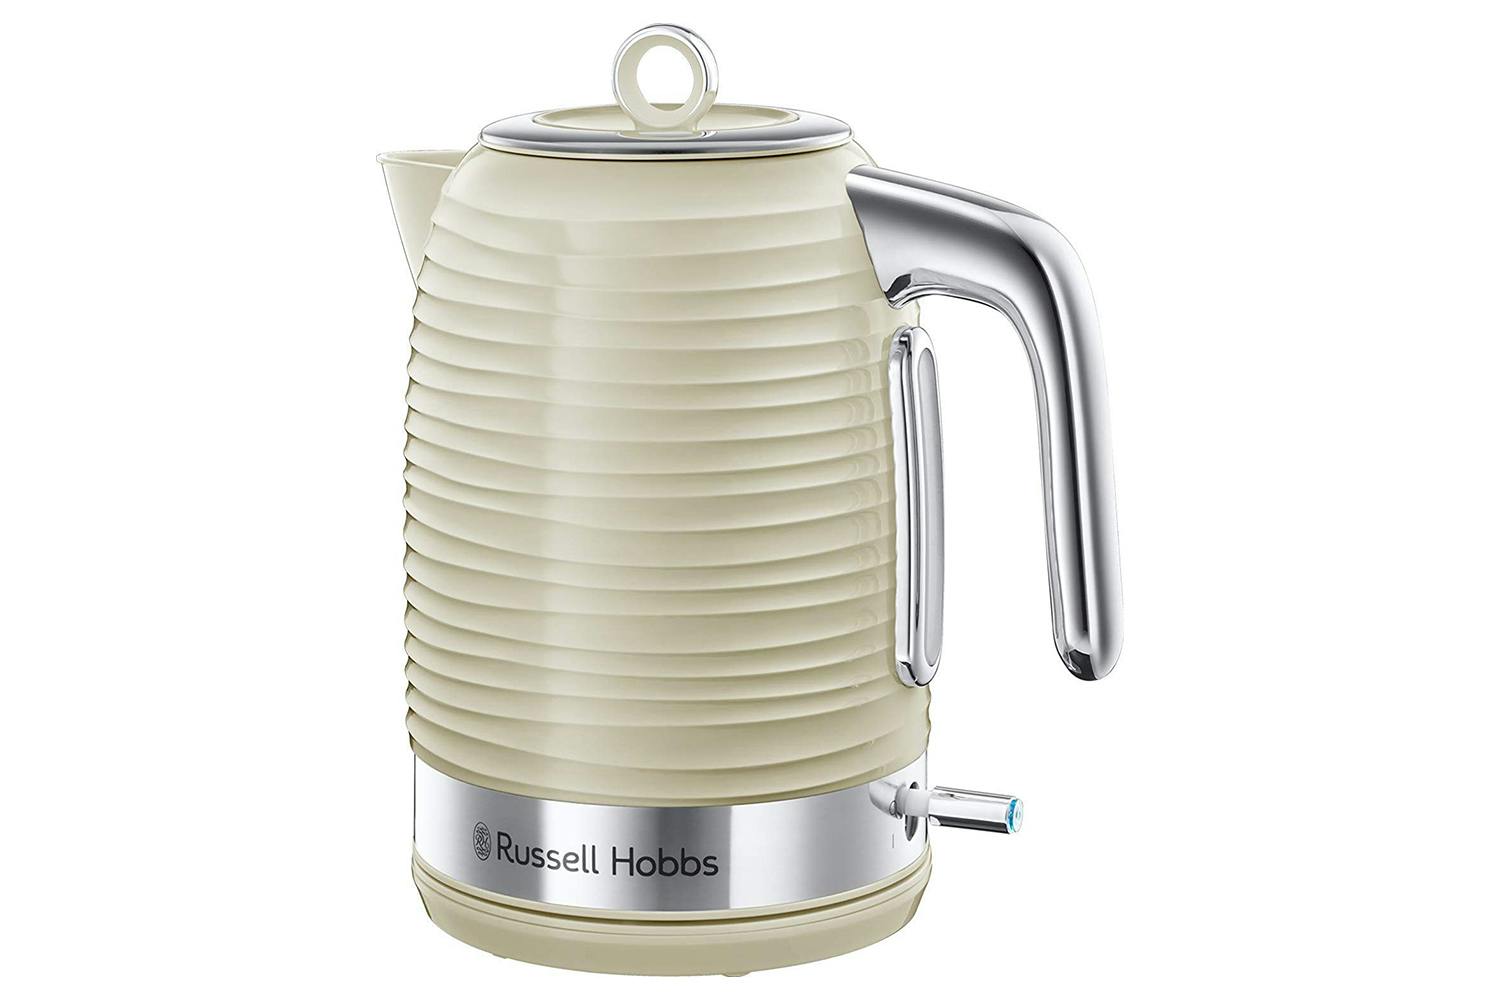 Russell Hobbs 1.7L Inspire Electric Kettle | 24364 | Cream